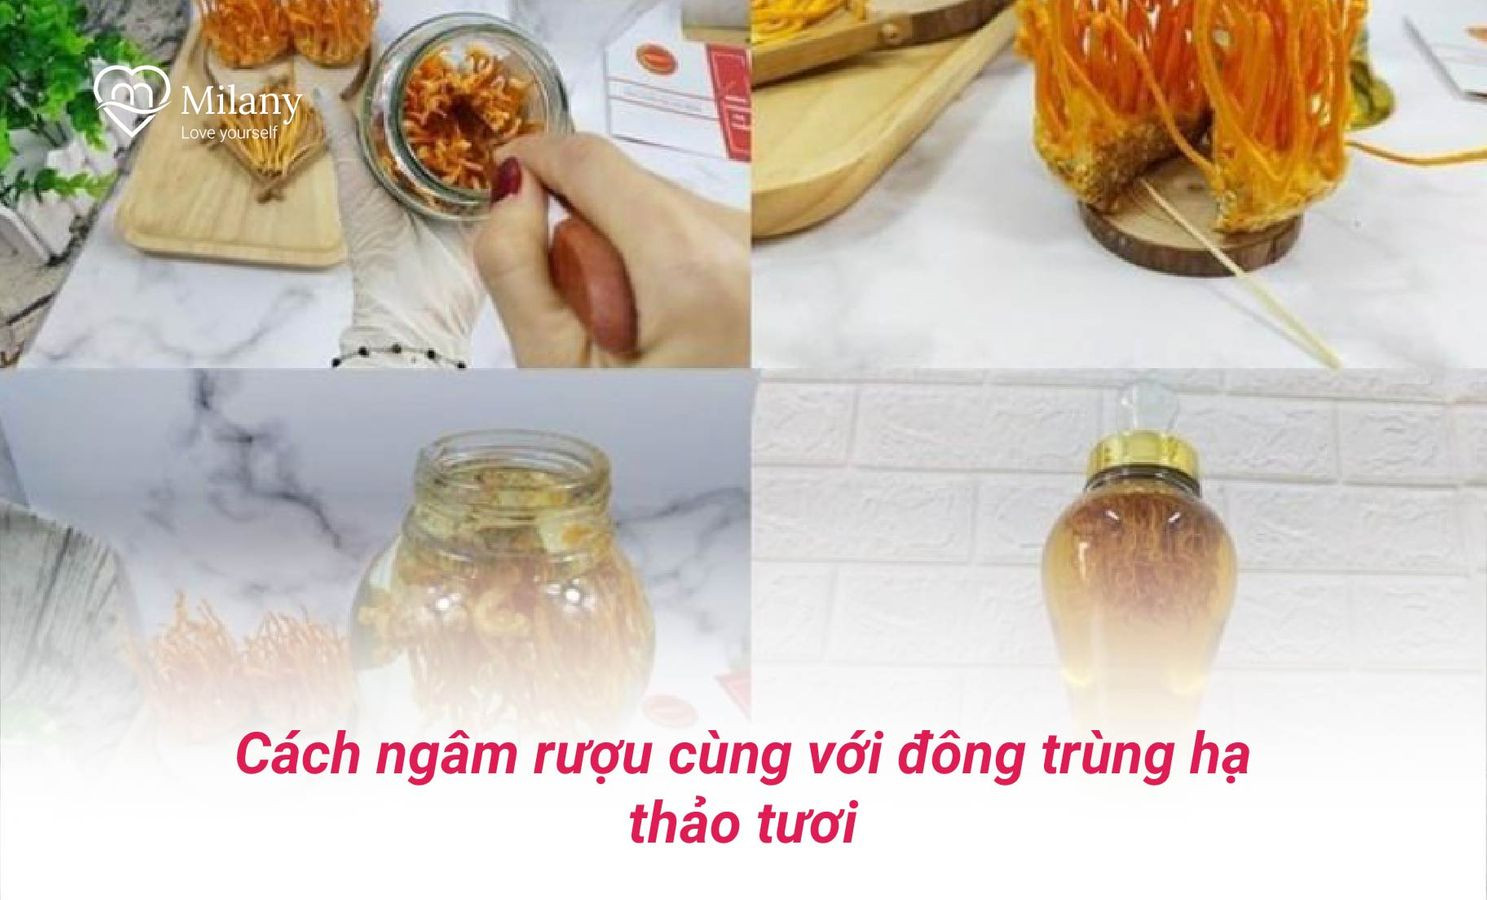 cach ngam ruou dong trung ha thao